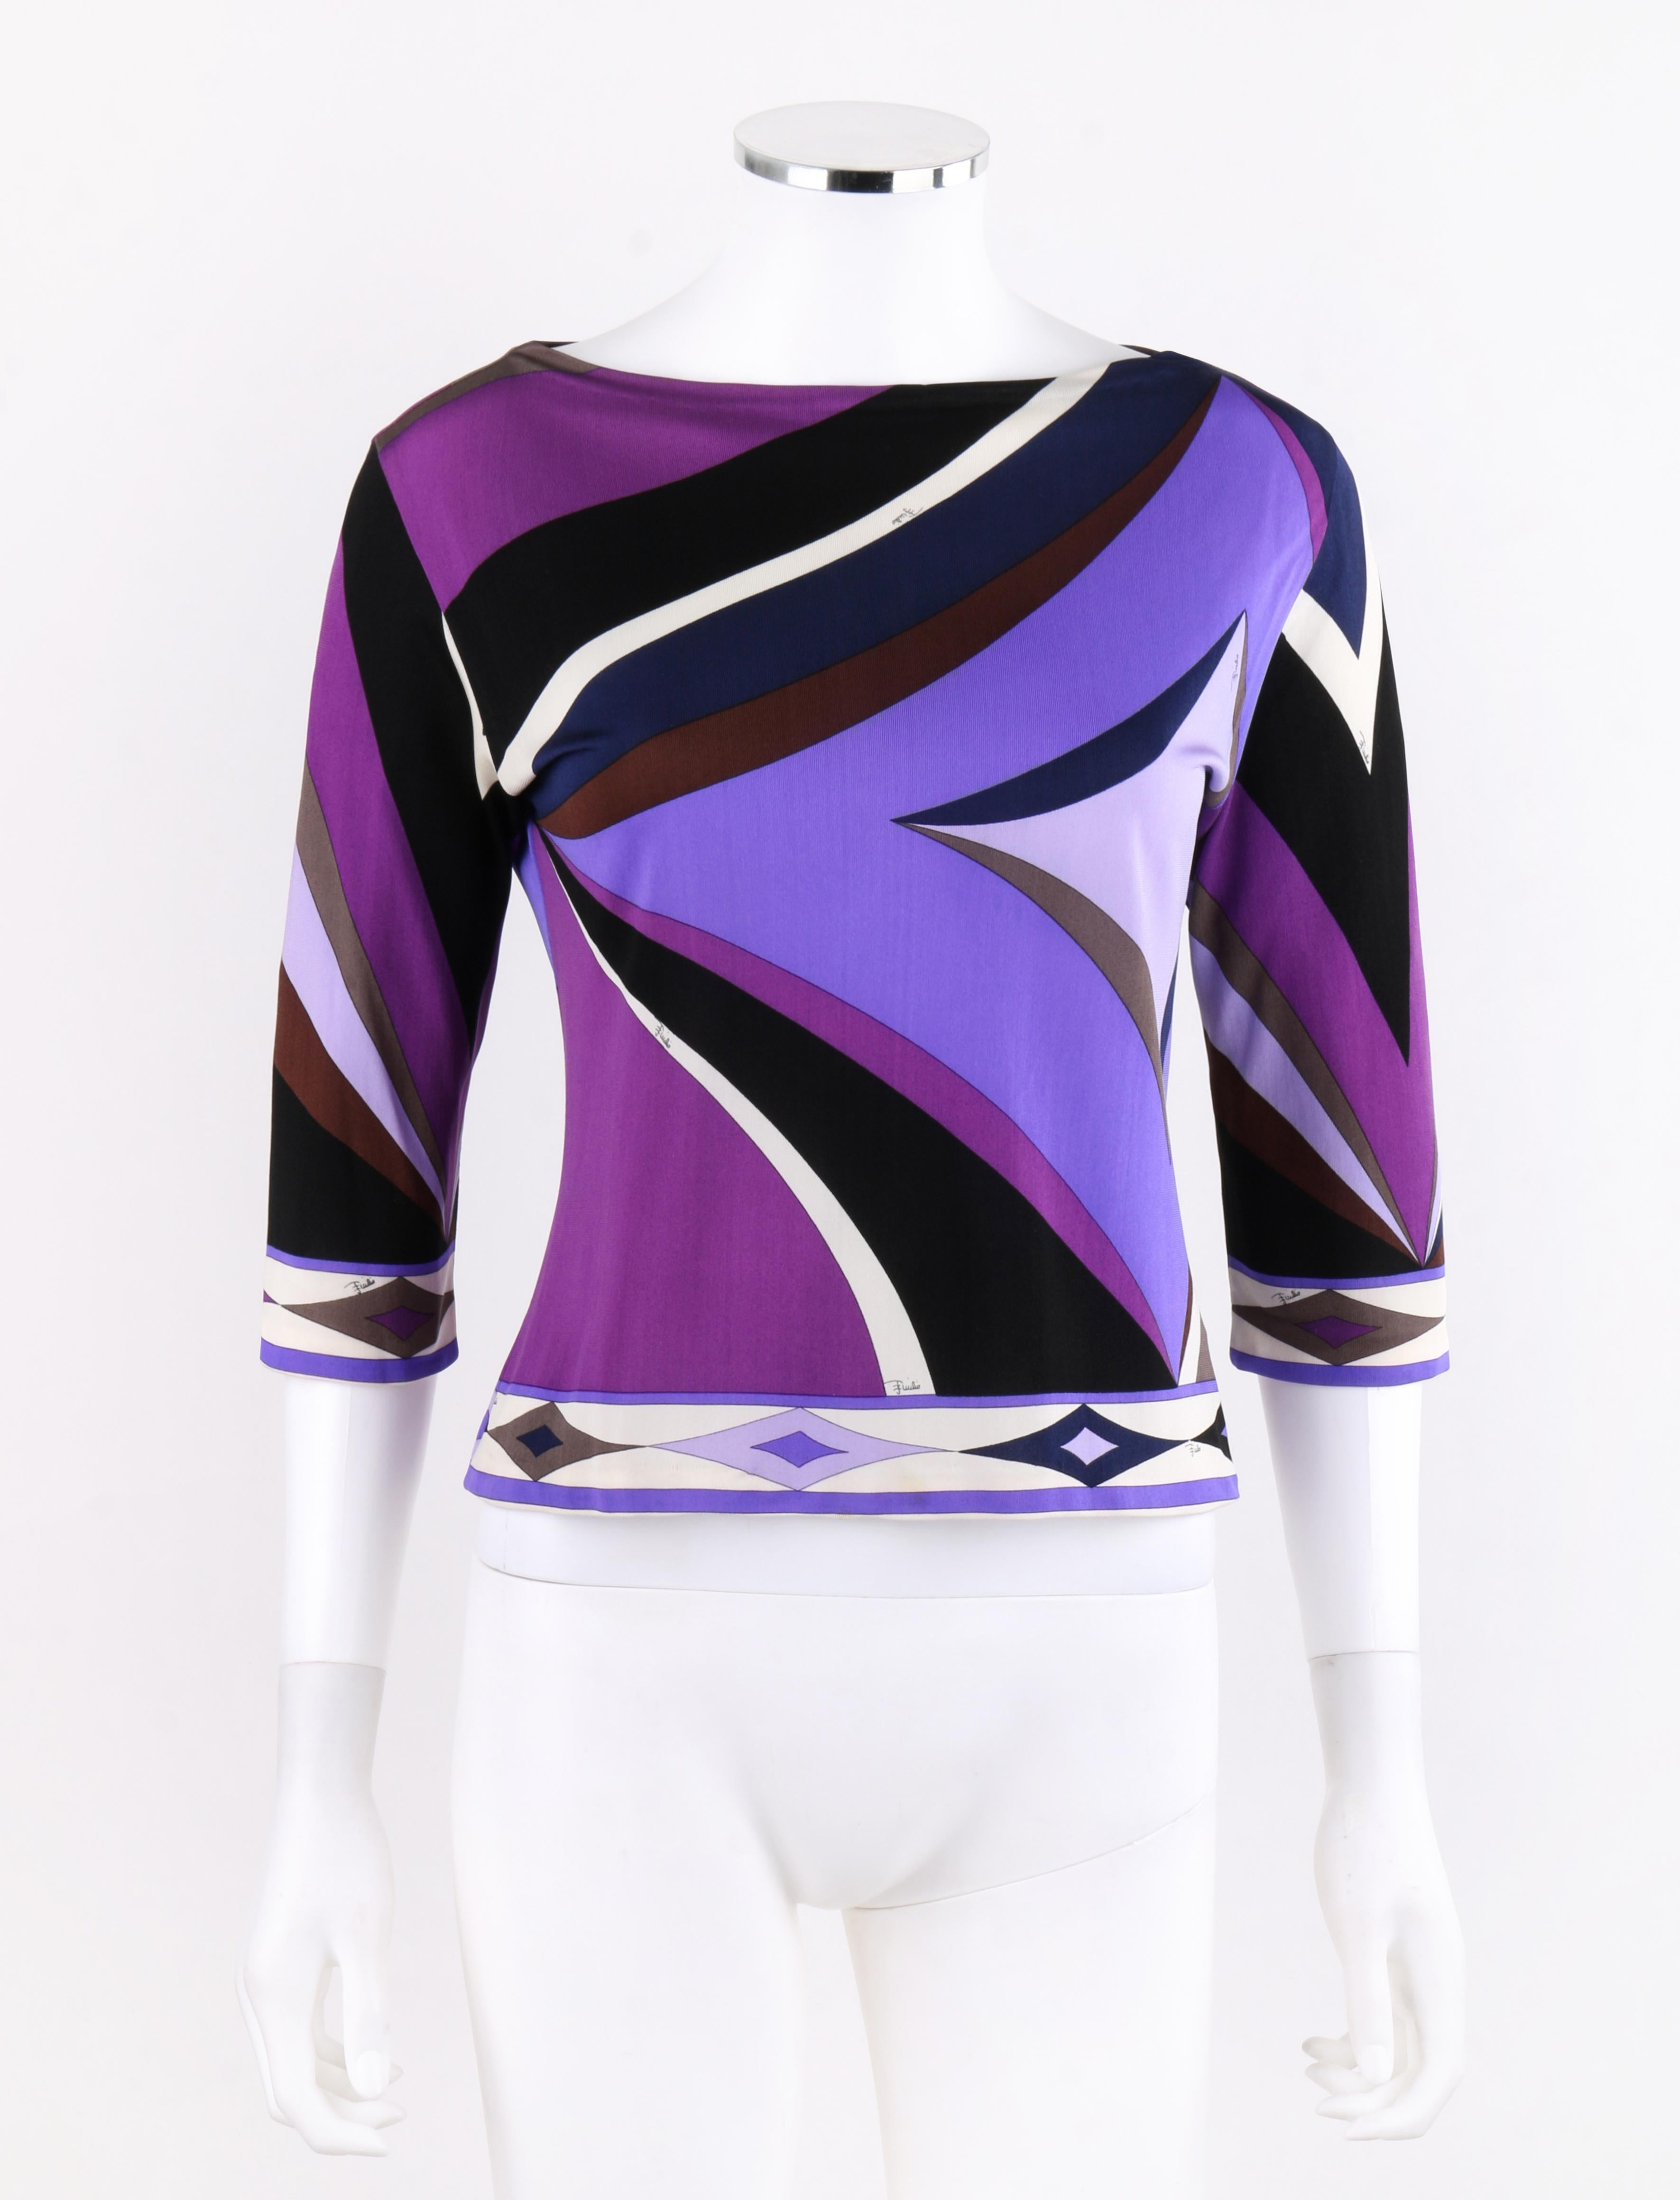 EMILIO PUCCI c.2000’s Purple Diamond Signature Print Boatneck Silk Jersey Top
 
Brand / Manufacturer: Emilio Pucci
Style: boatneck 3/4 sleeve 
Color(s): Shades of purple, black, grey, brown, blue and white. 
Lined: No      
Marked Fabric Content: